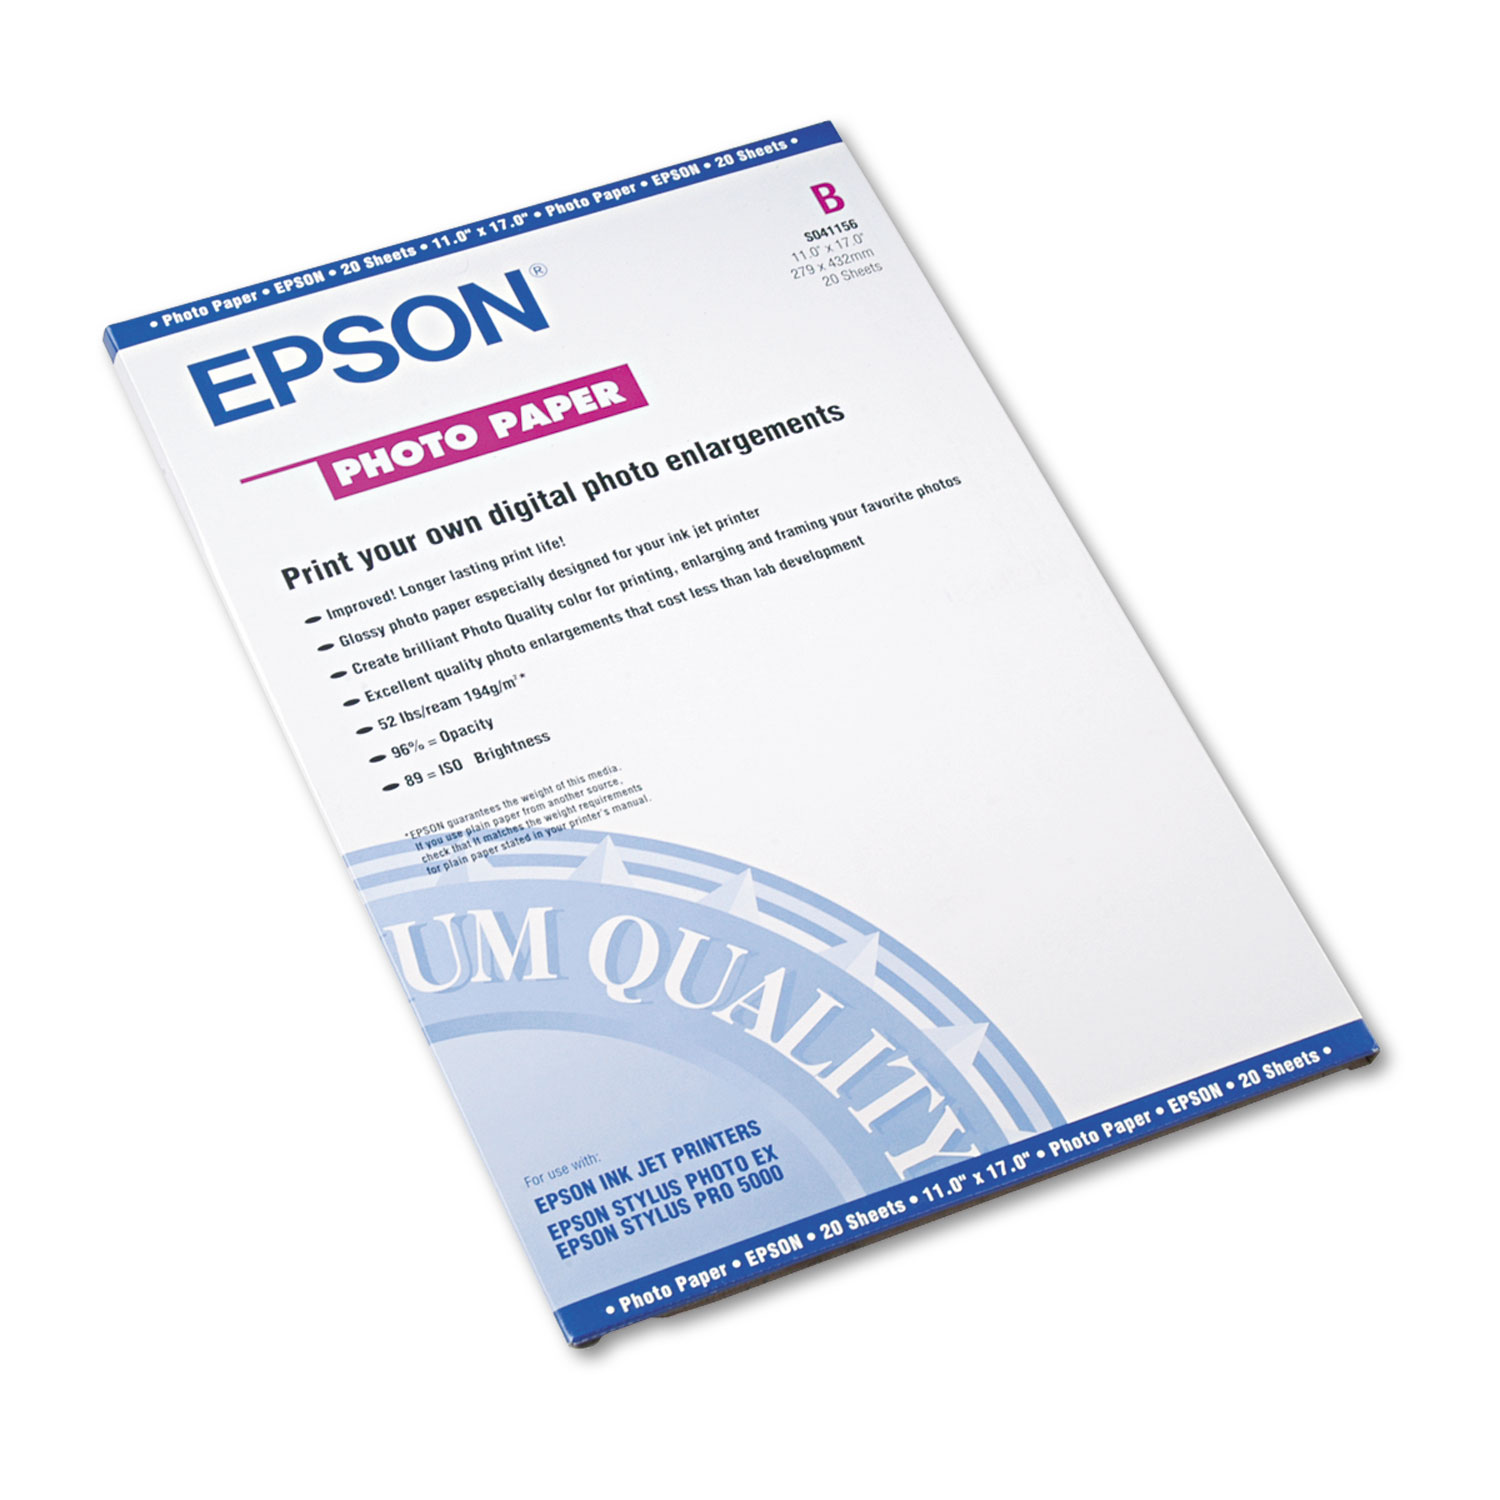  Epson S041156 Glossy Photo Paper, 9.4 mil, 11 x 17, Glossy White, 20/Pack (EPSS041156) 